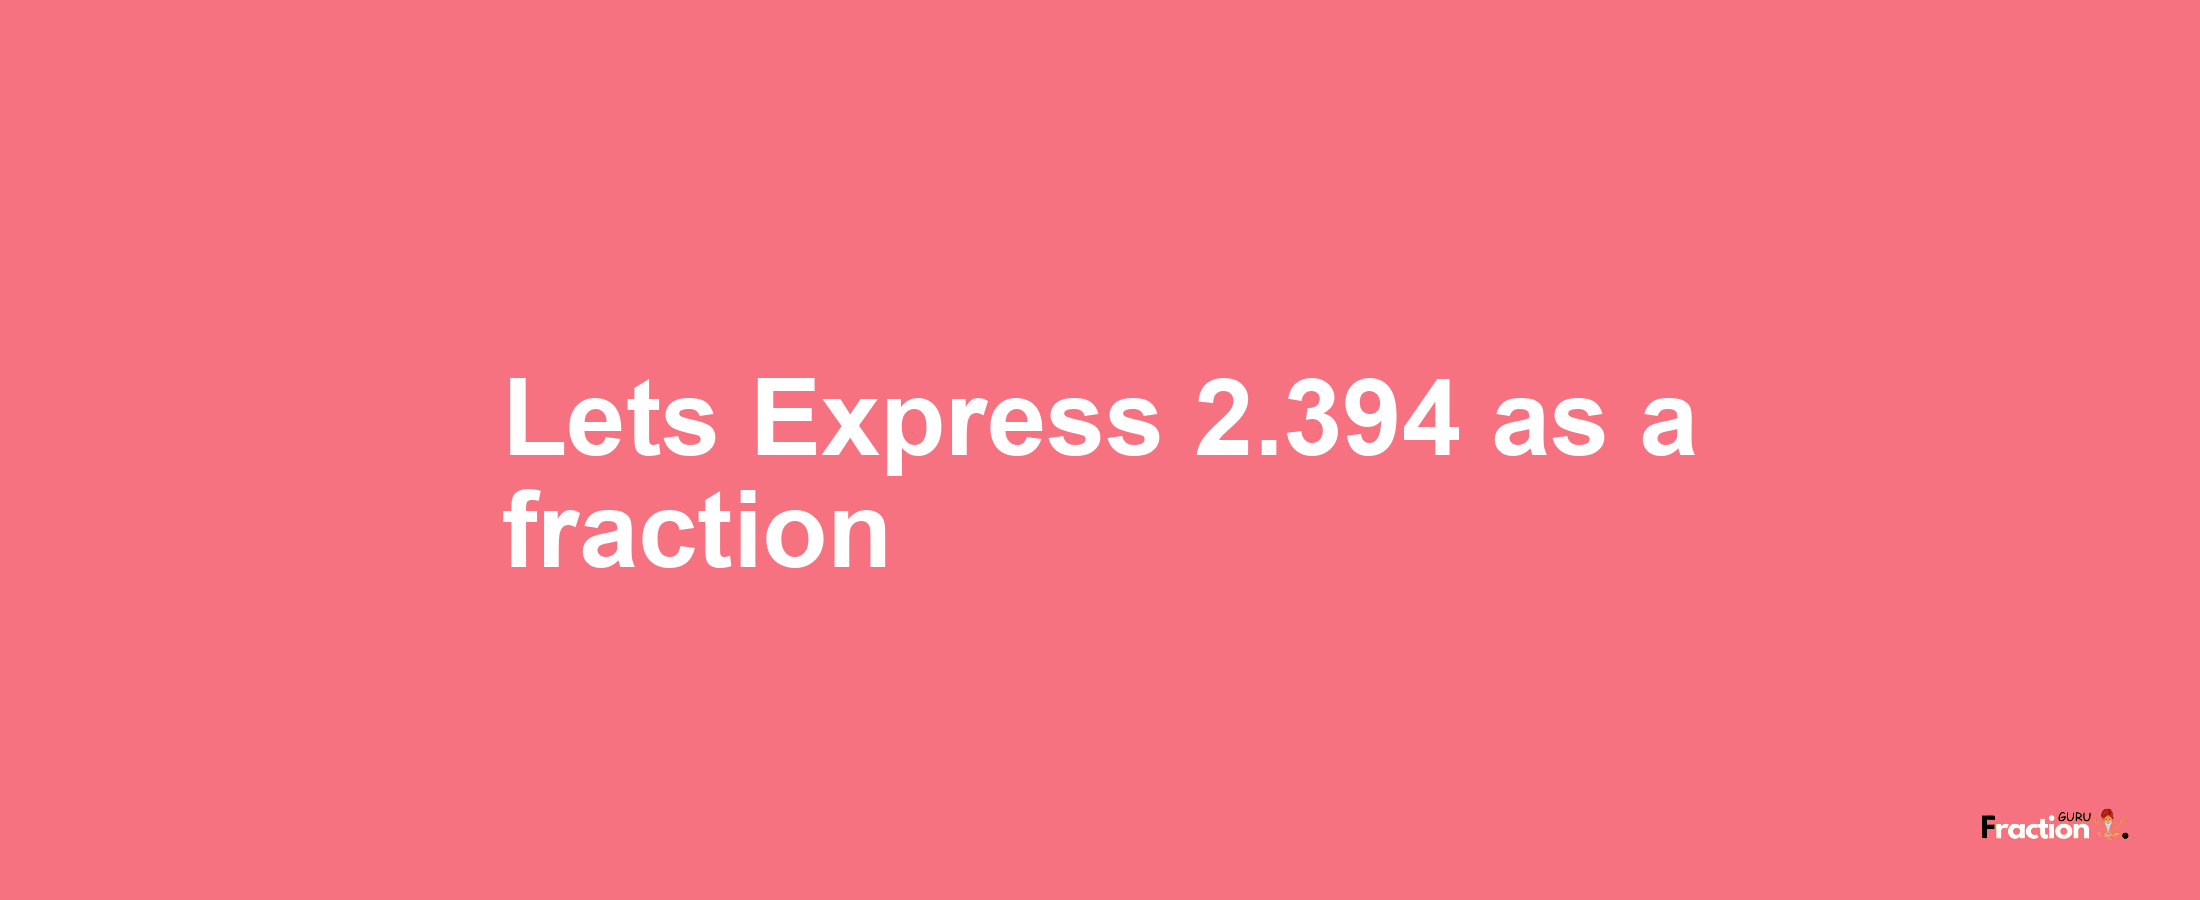 Lets Express 2.394 as afraction